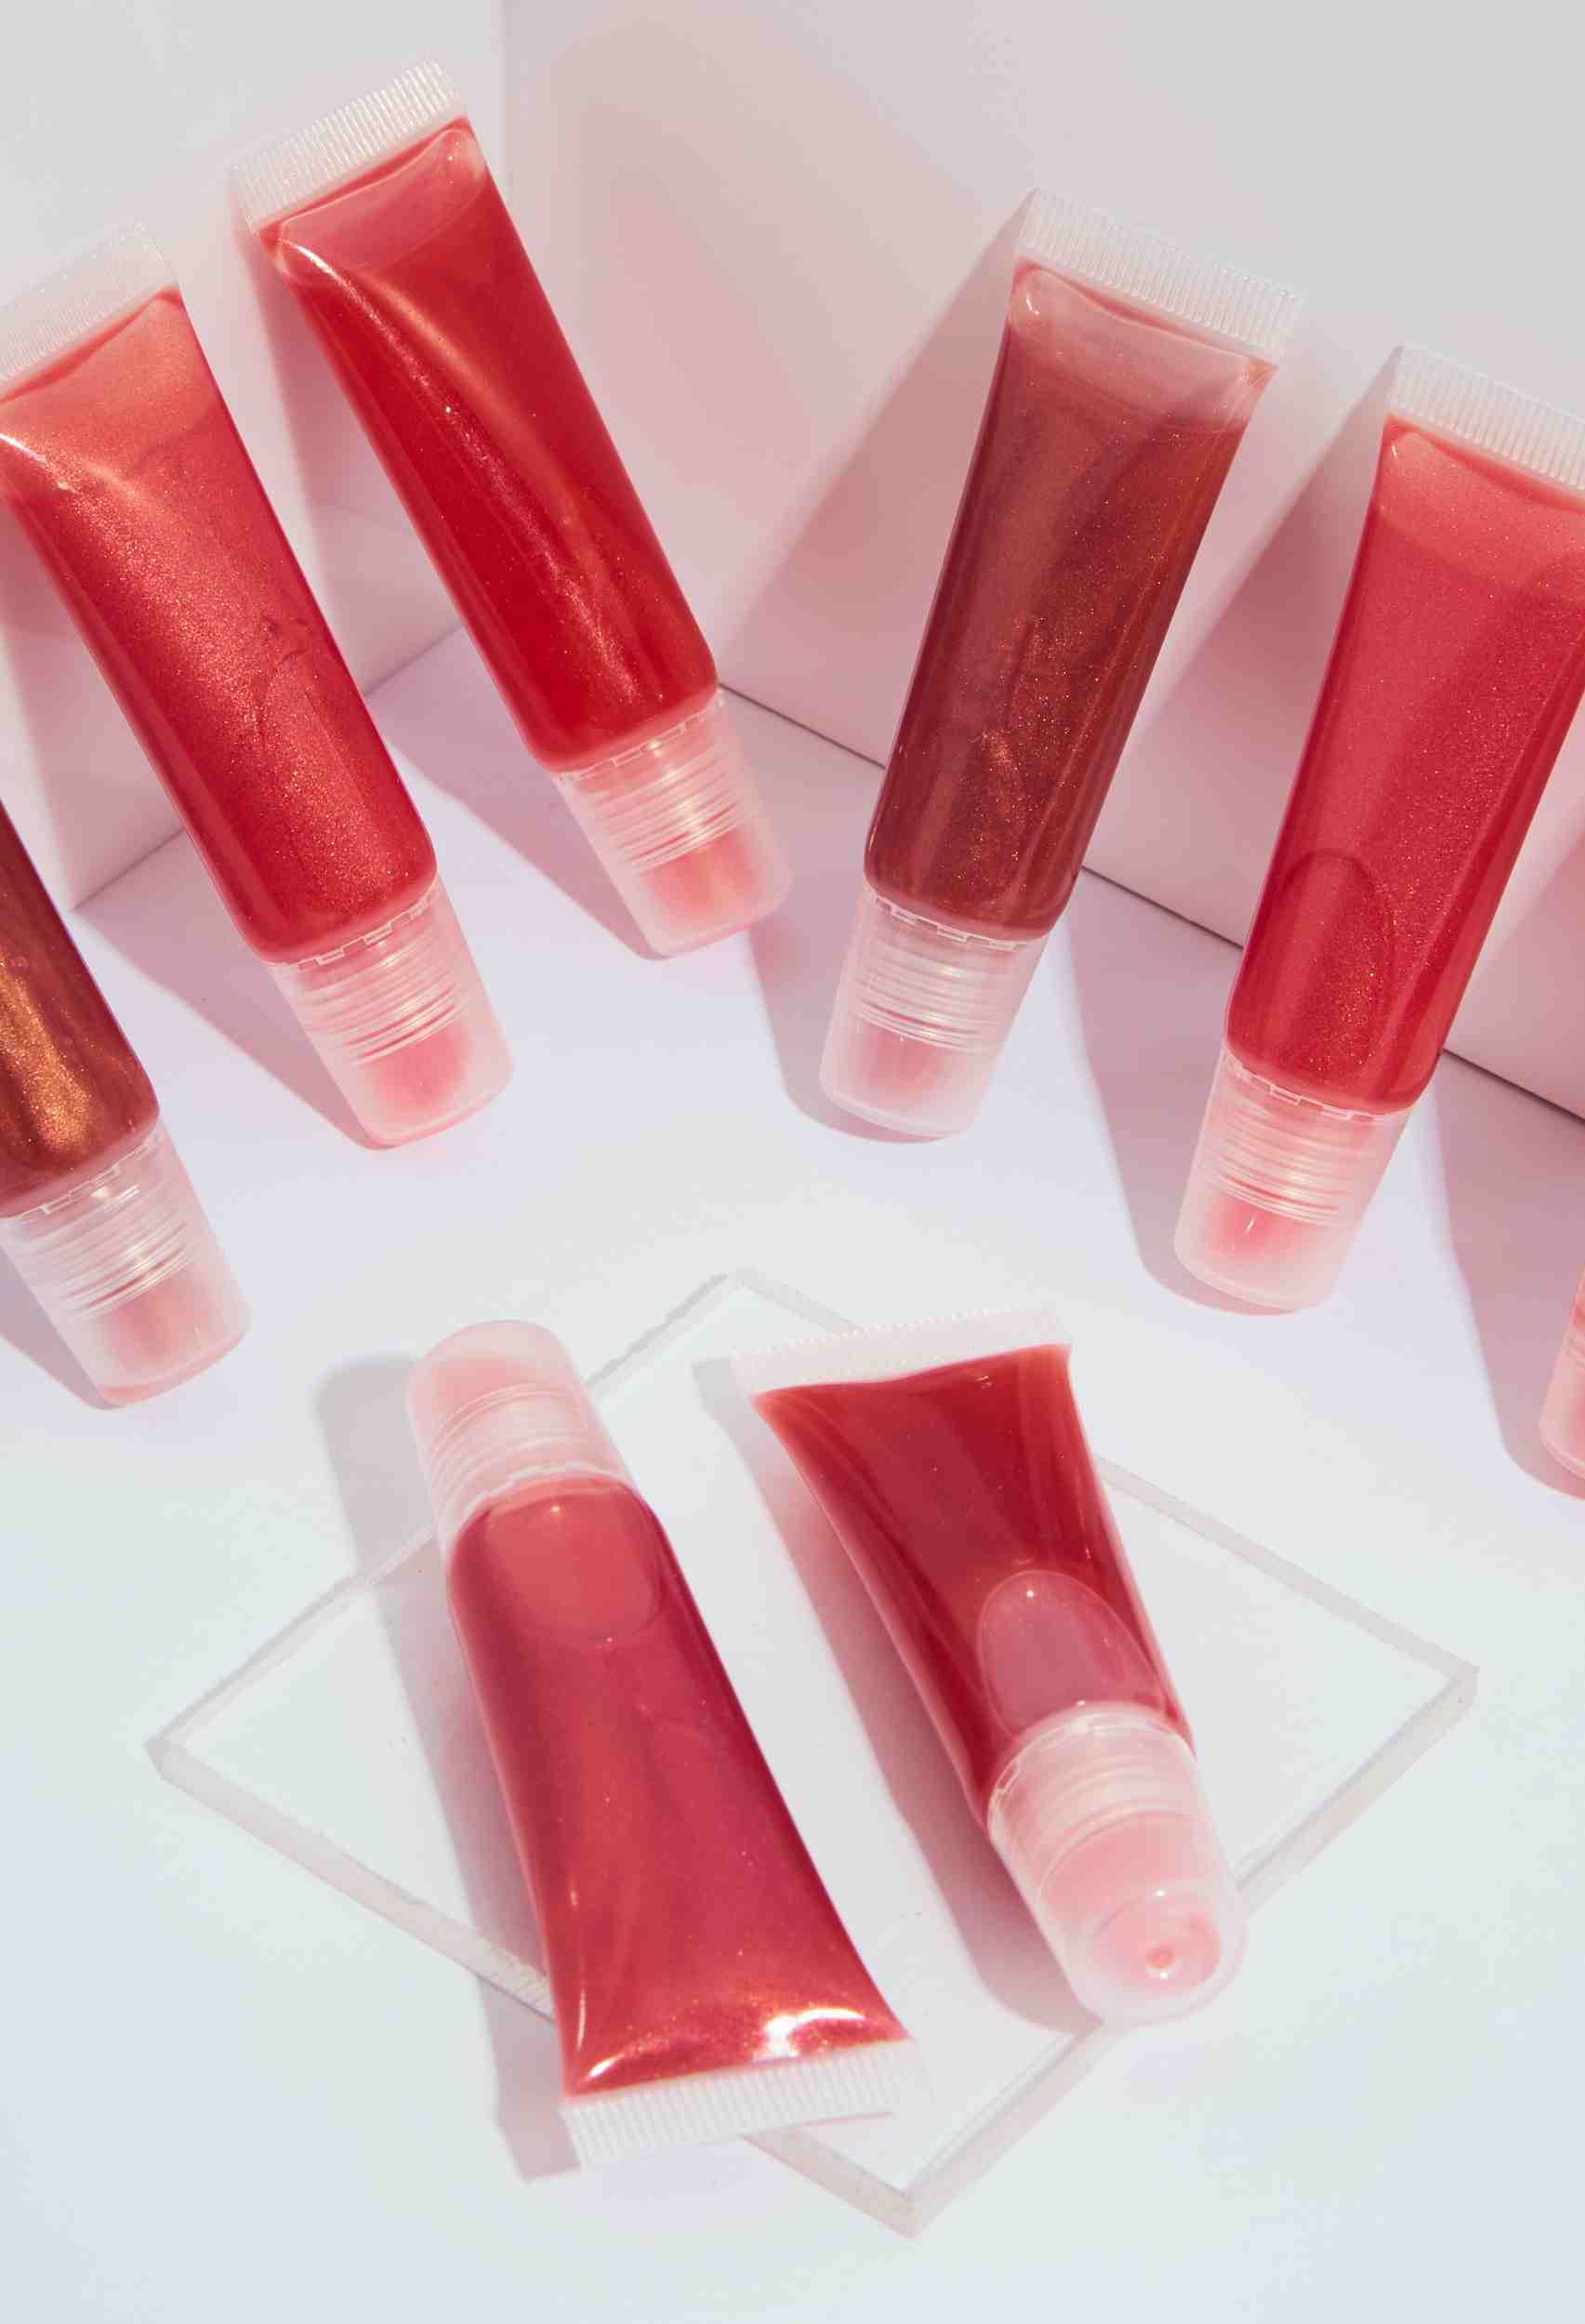 The Best Natural Lip Gloss Ingredients for Your Children's Healthy Lips